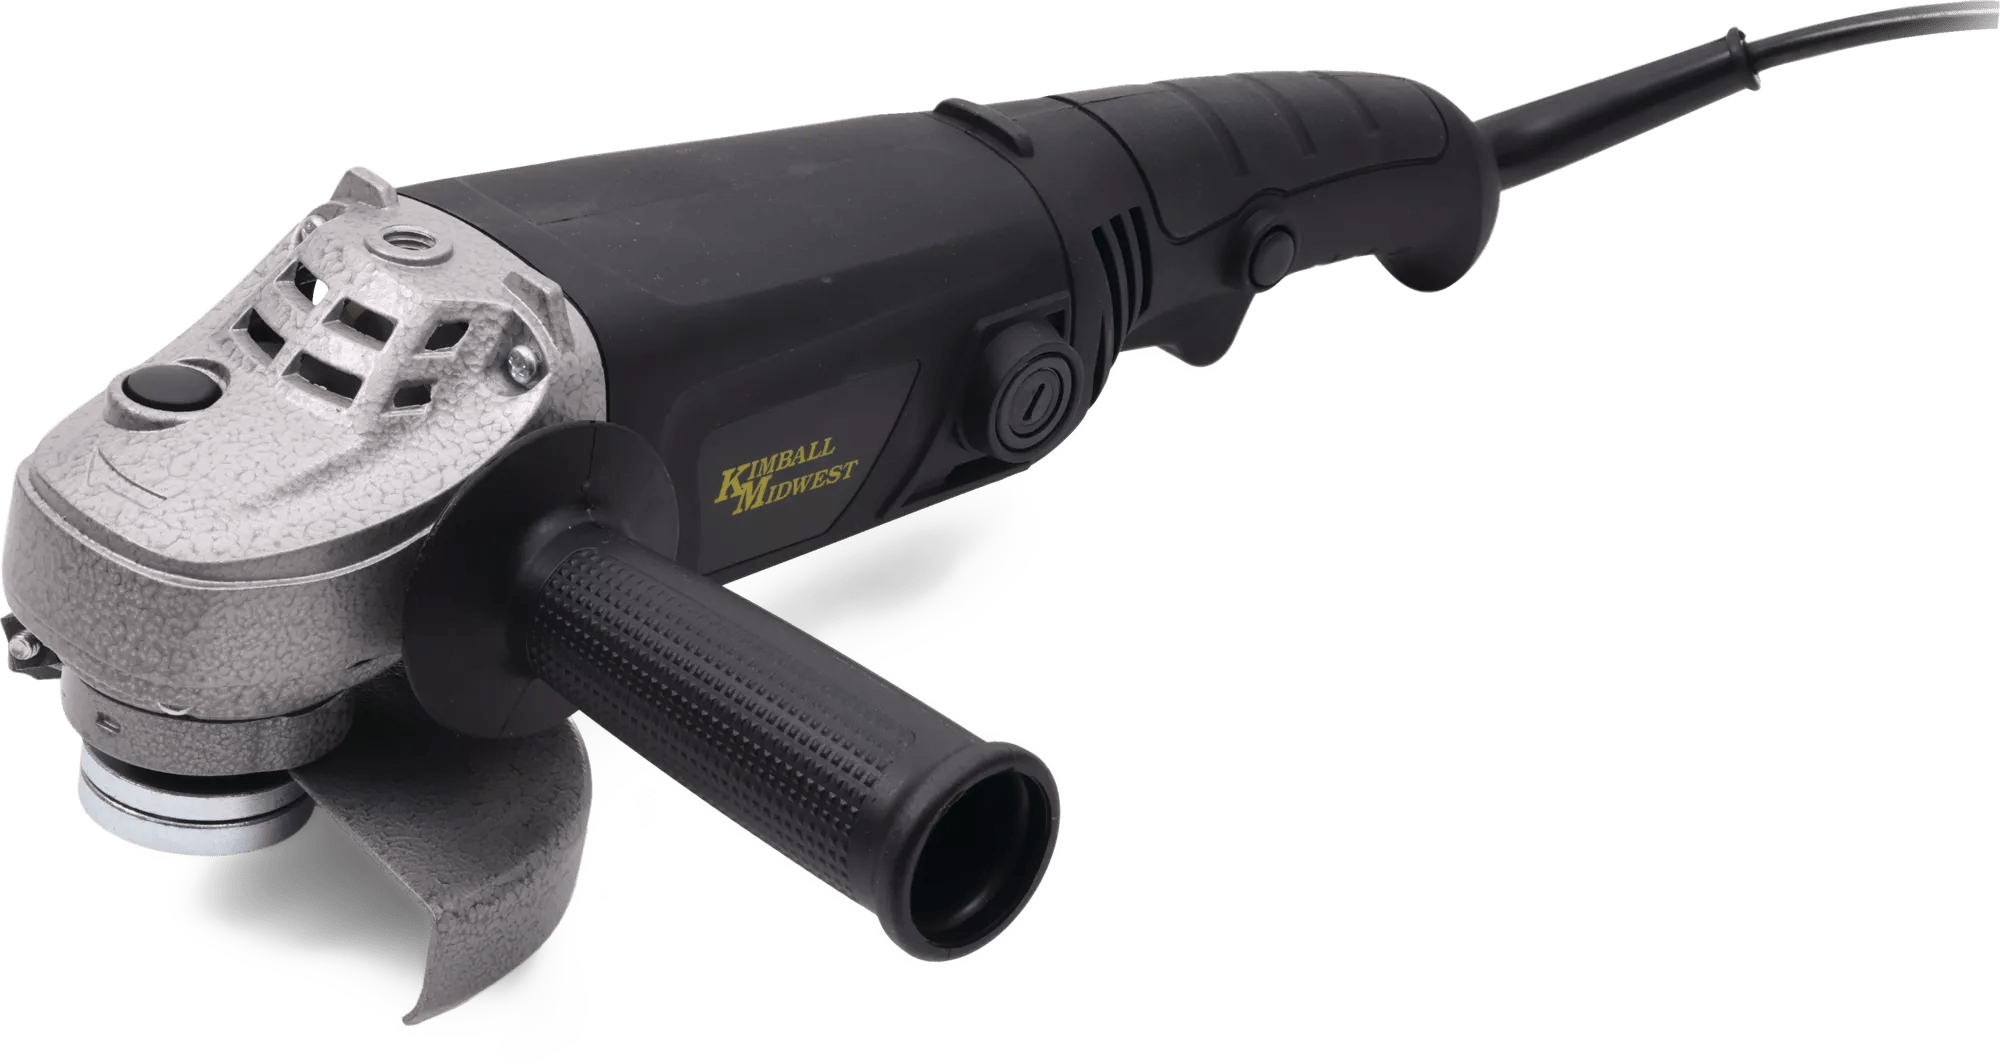 4-1/2" Electric Angle Grinder